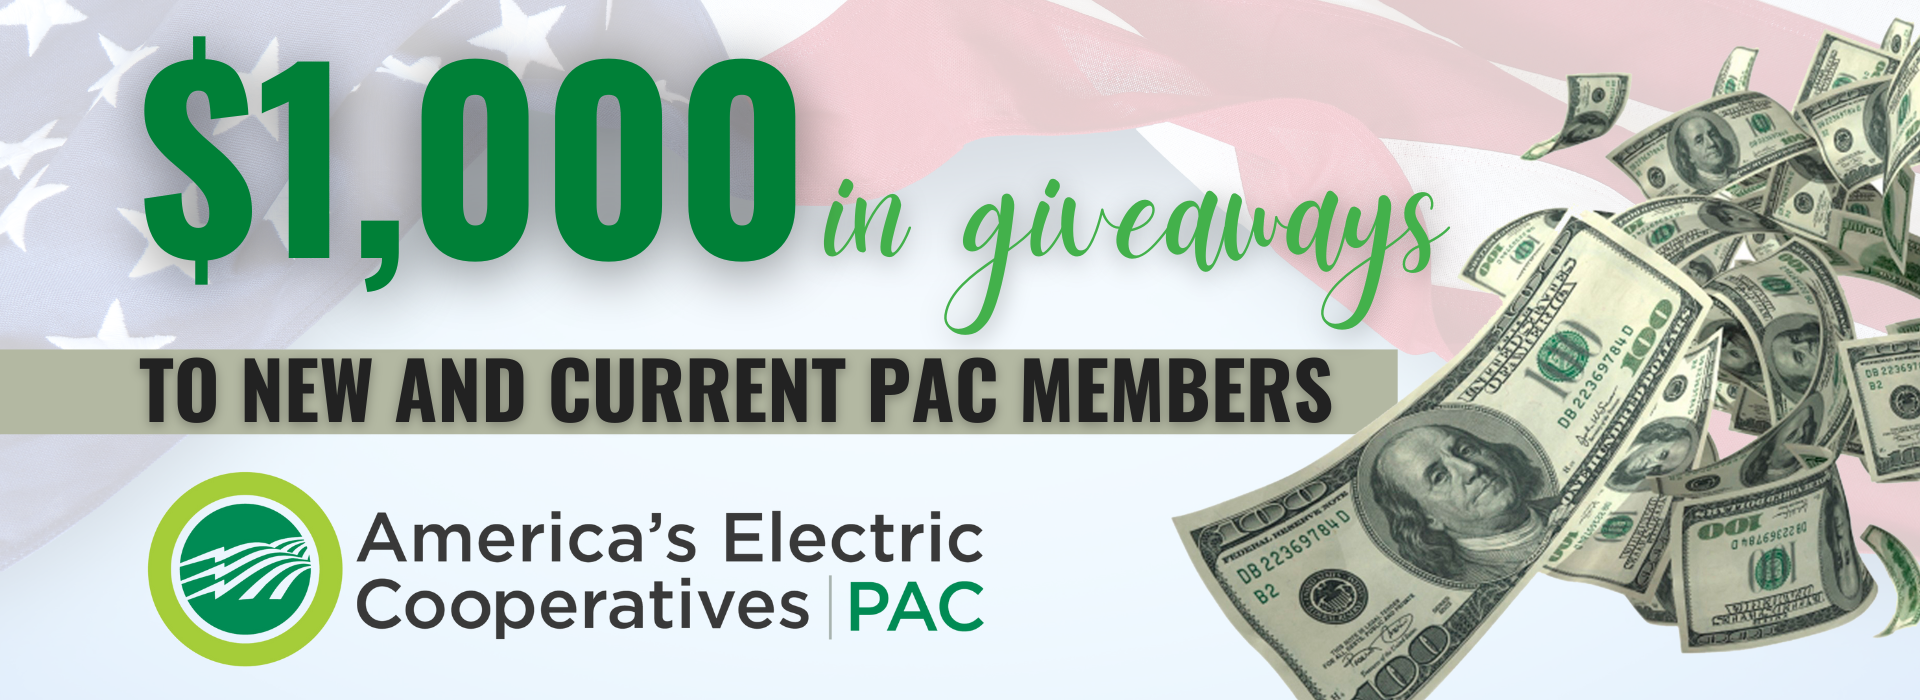 PAC giveaway